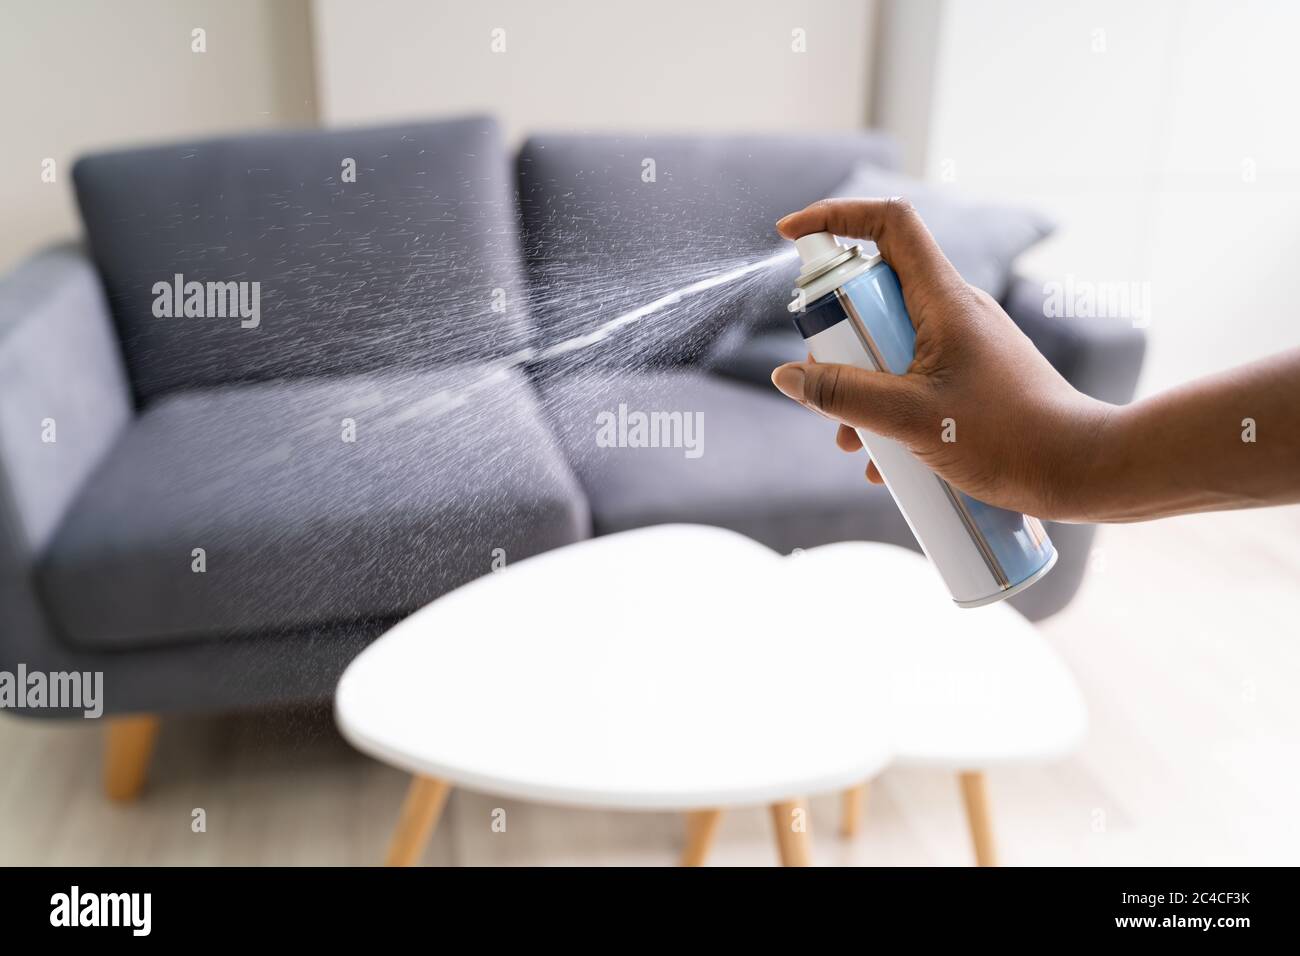 African Woman Using Living Room Air Spray Stock Photo